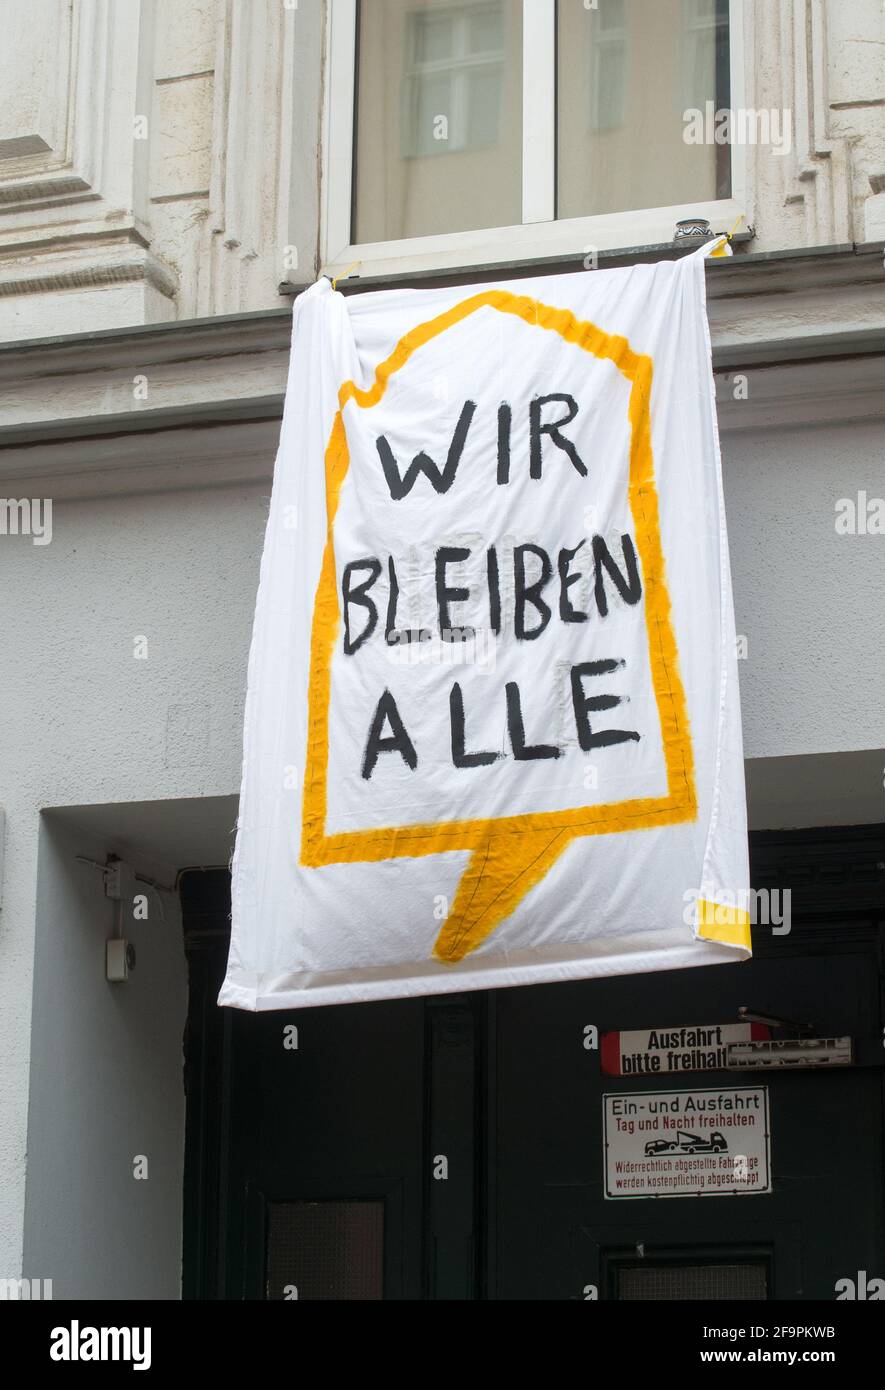 07.12.2020, Berlin, Berlin, Germany - Mitte - Tenant protest against the sale of rental apartments. 0CE201207D005CAROEX.JPG [MODEL RELEASE: NOT APPLIC Stock Photo